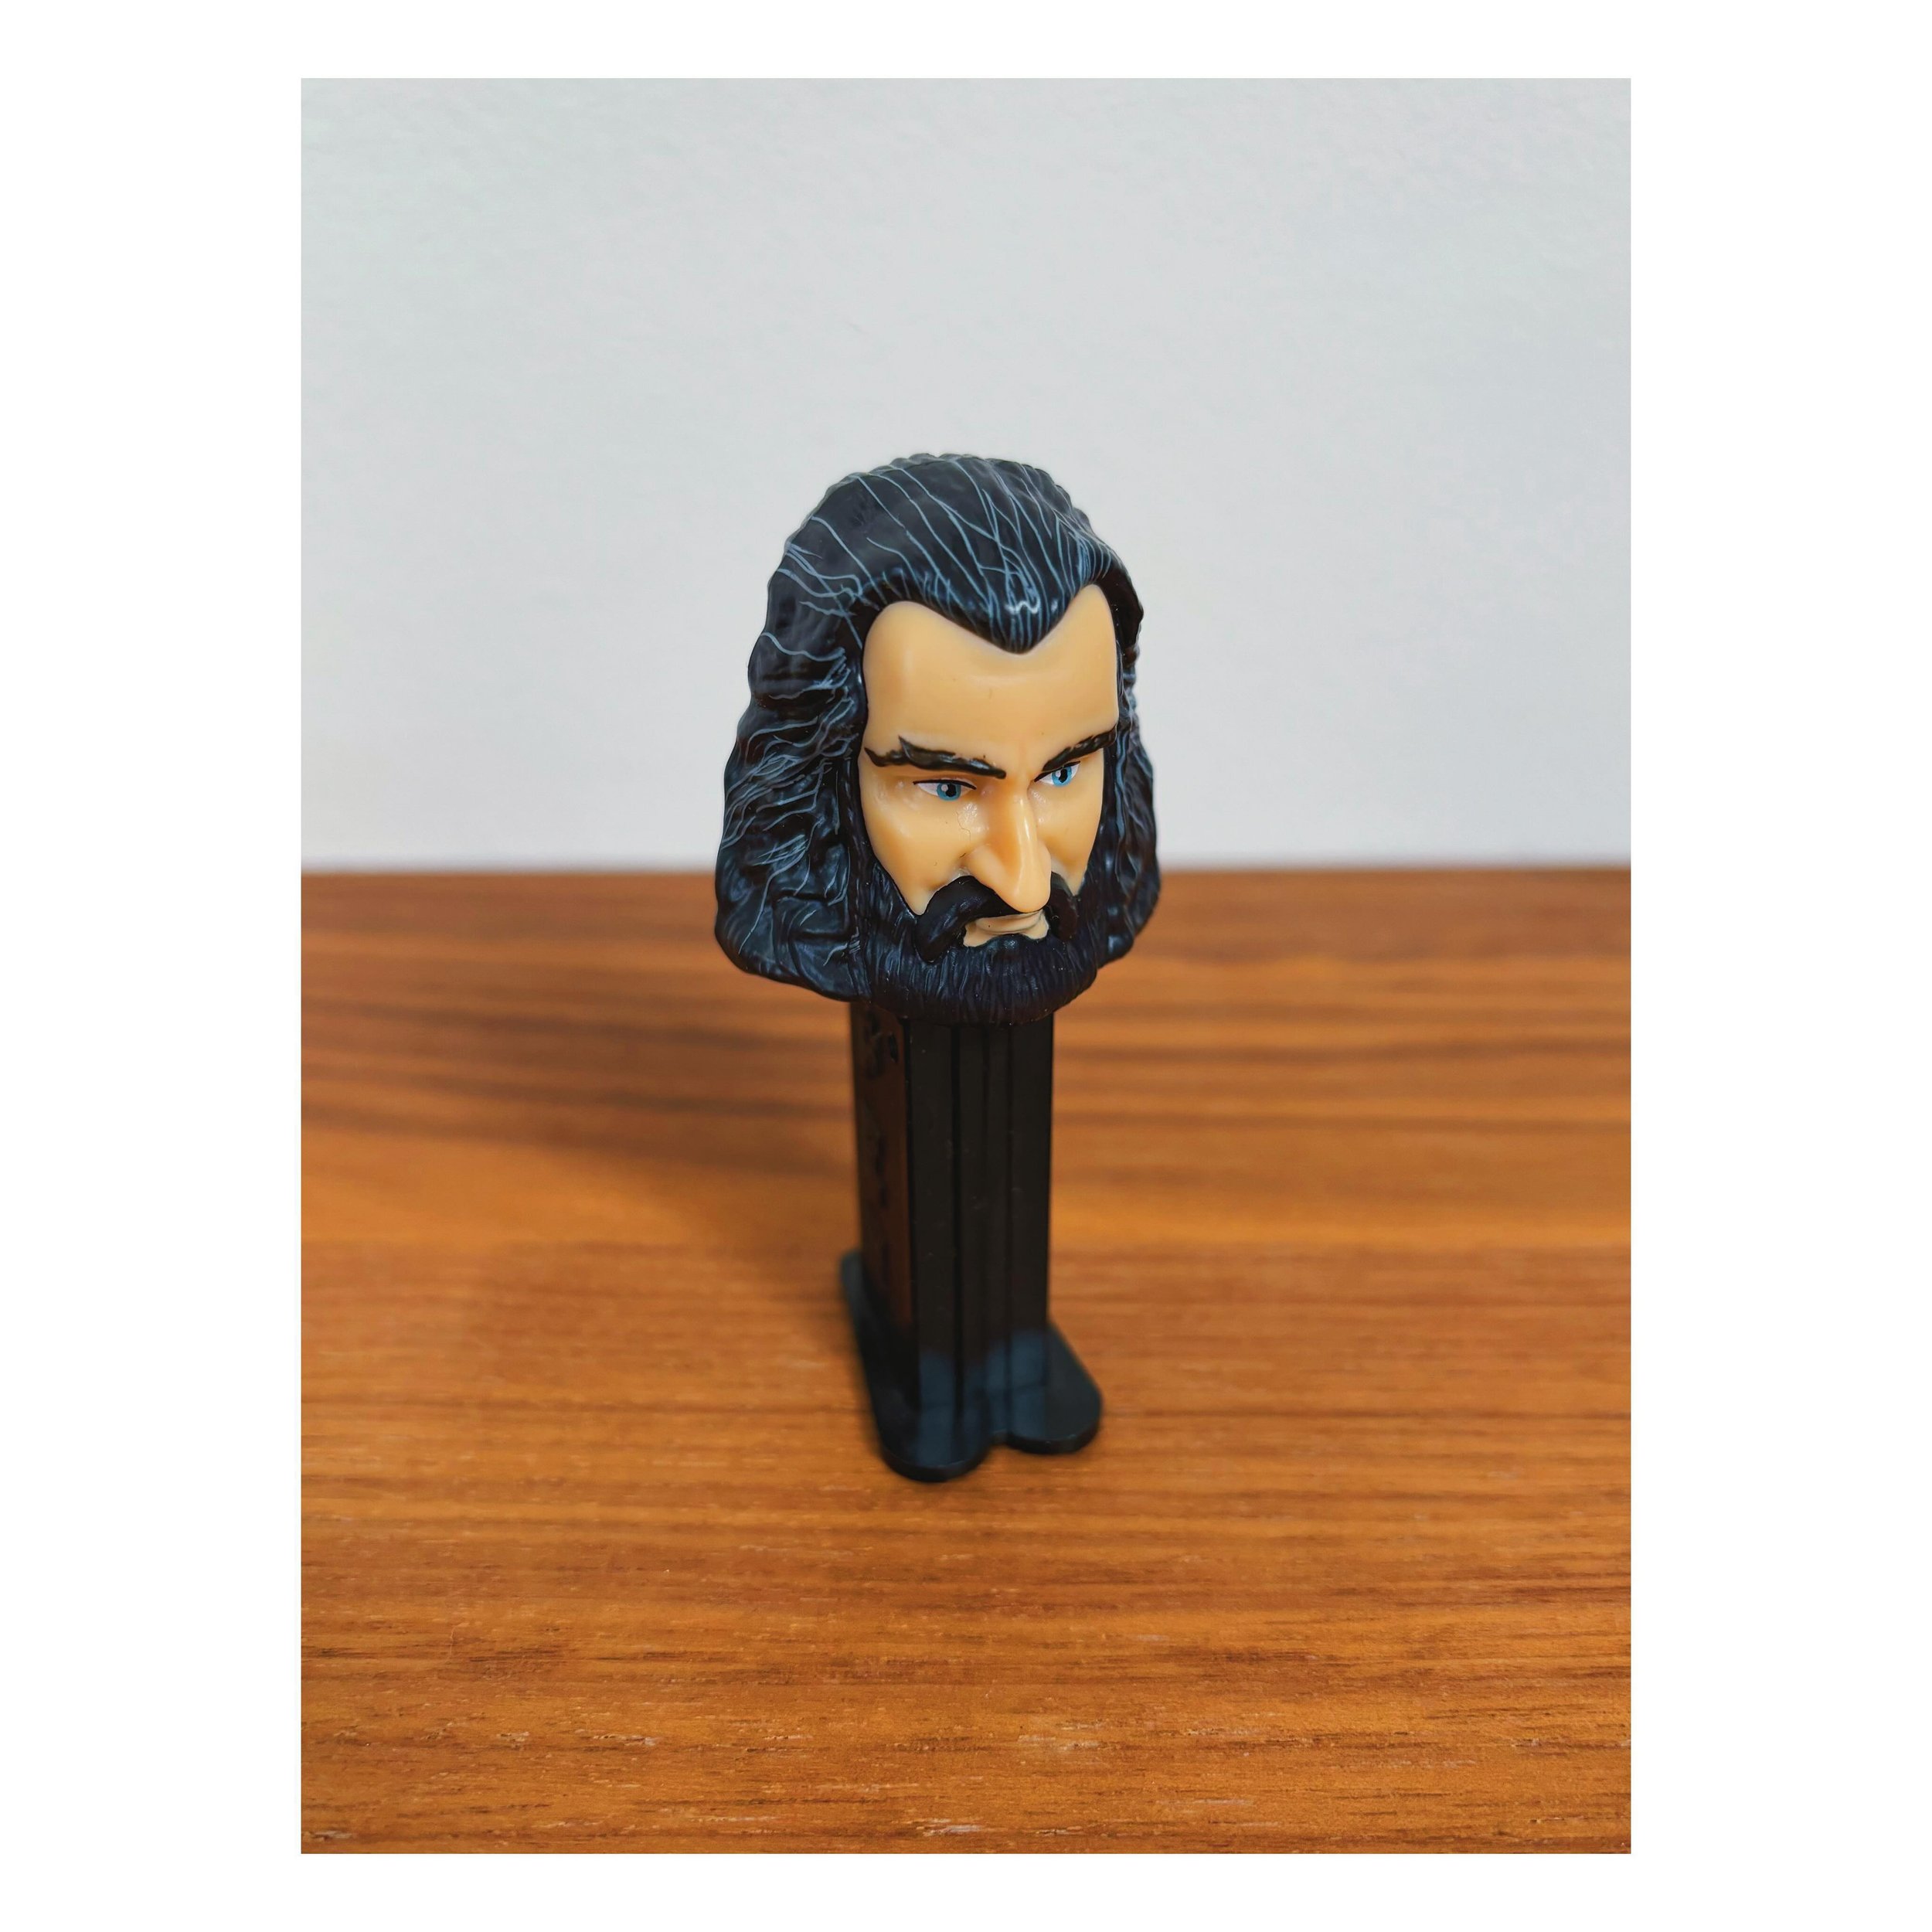 You&rsquo;re either in or out 🤷🏻&zwj;♂️
.
.
#pez #pezdispenser #candy #lordoftherings